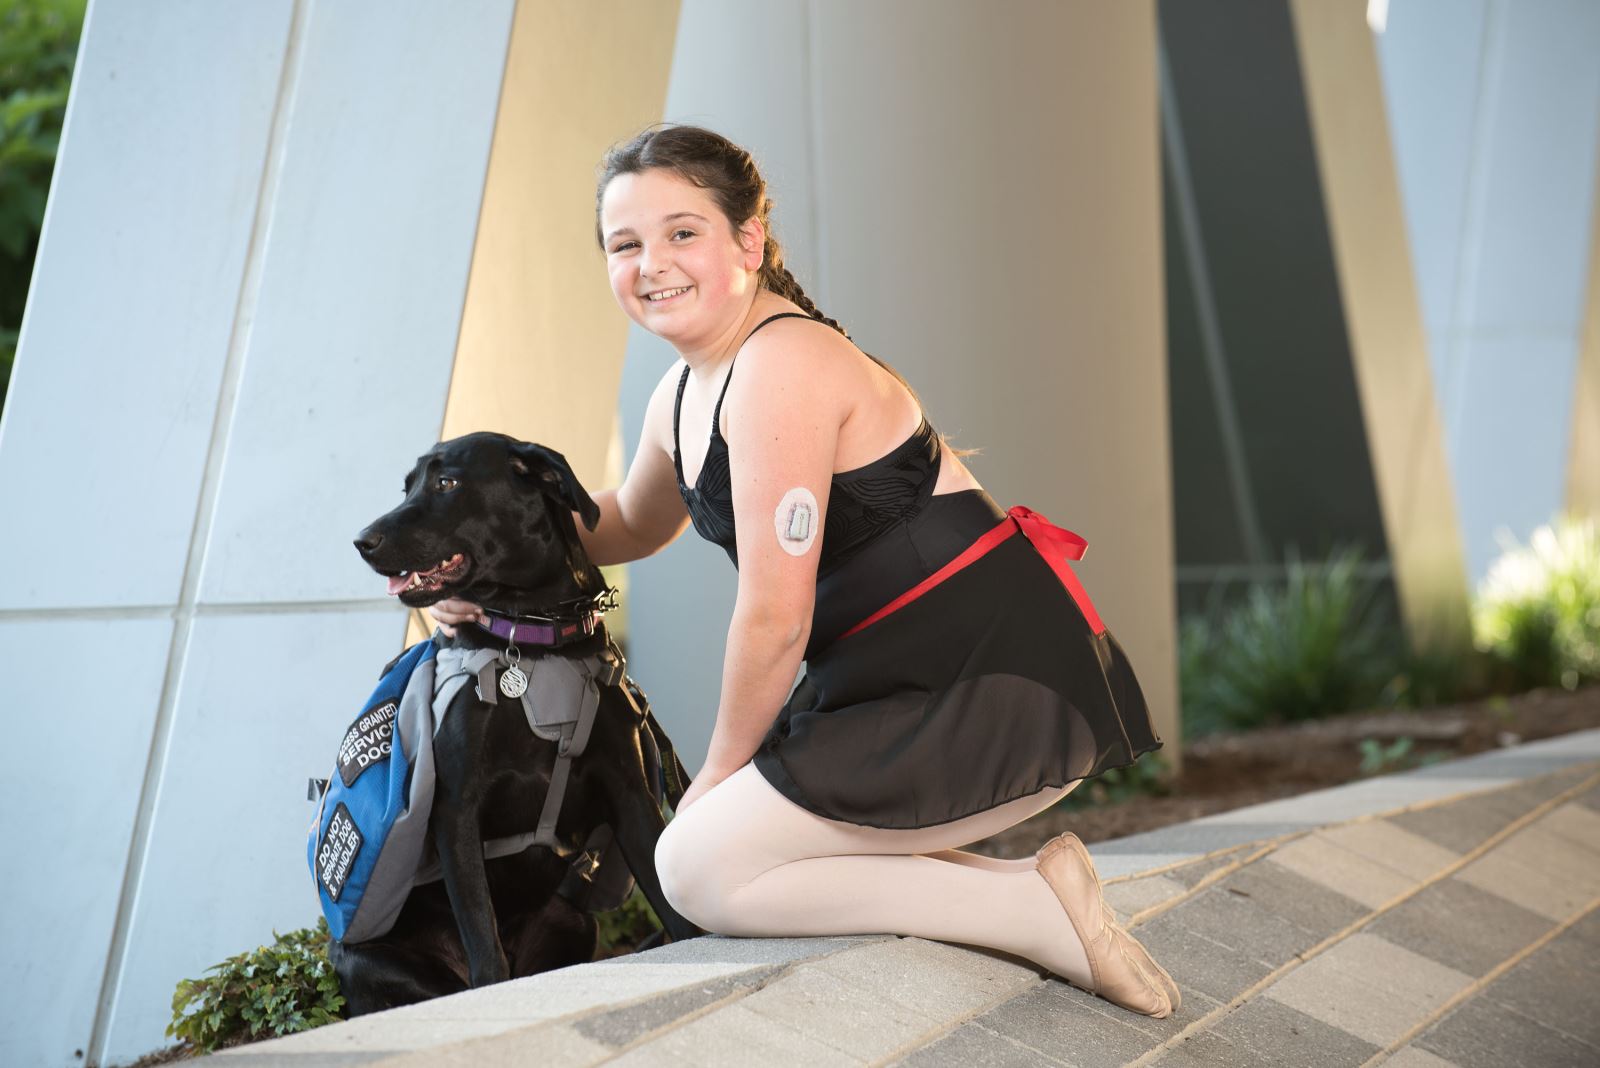 Girl in ballet warmup outfit poses with dog